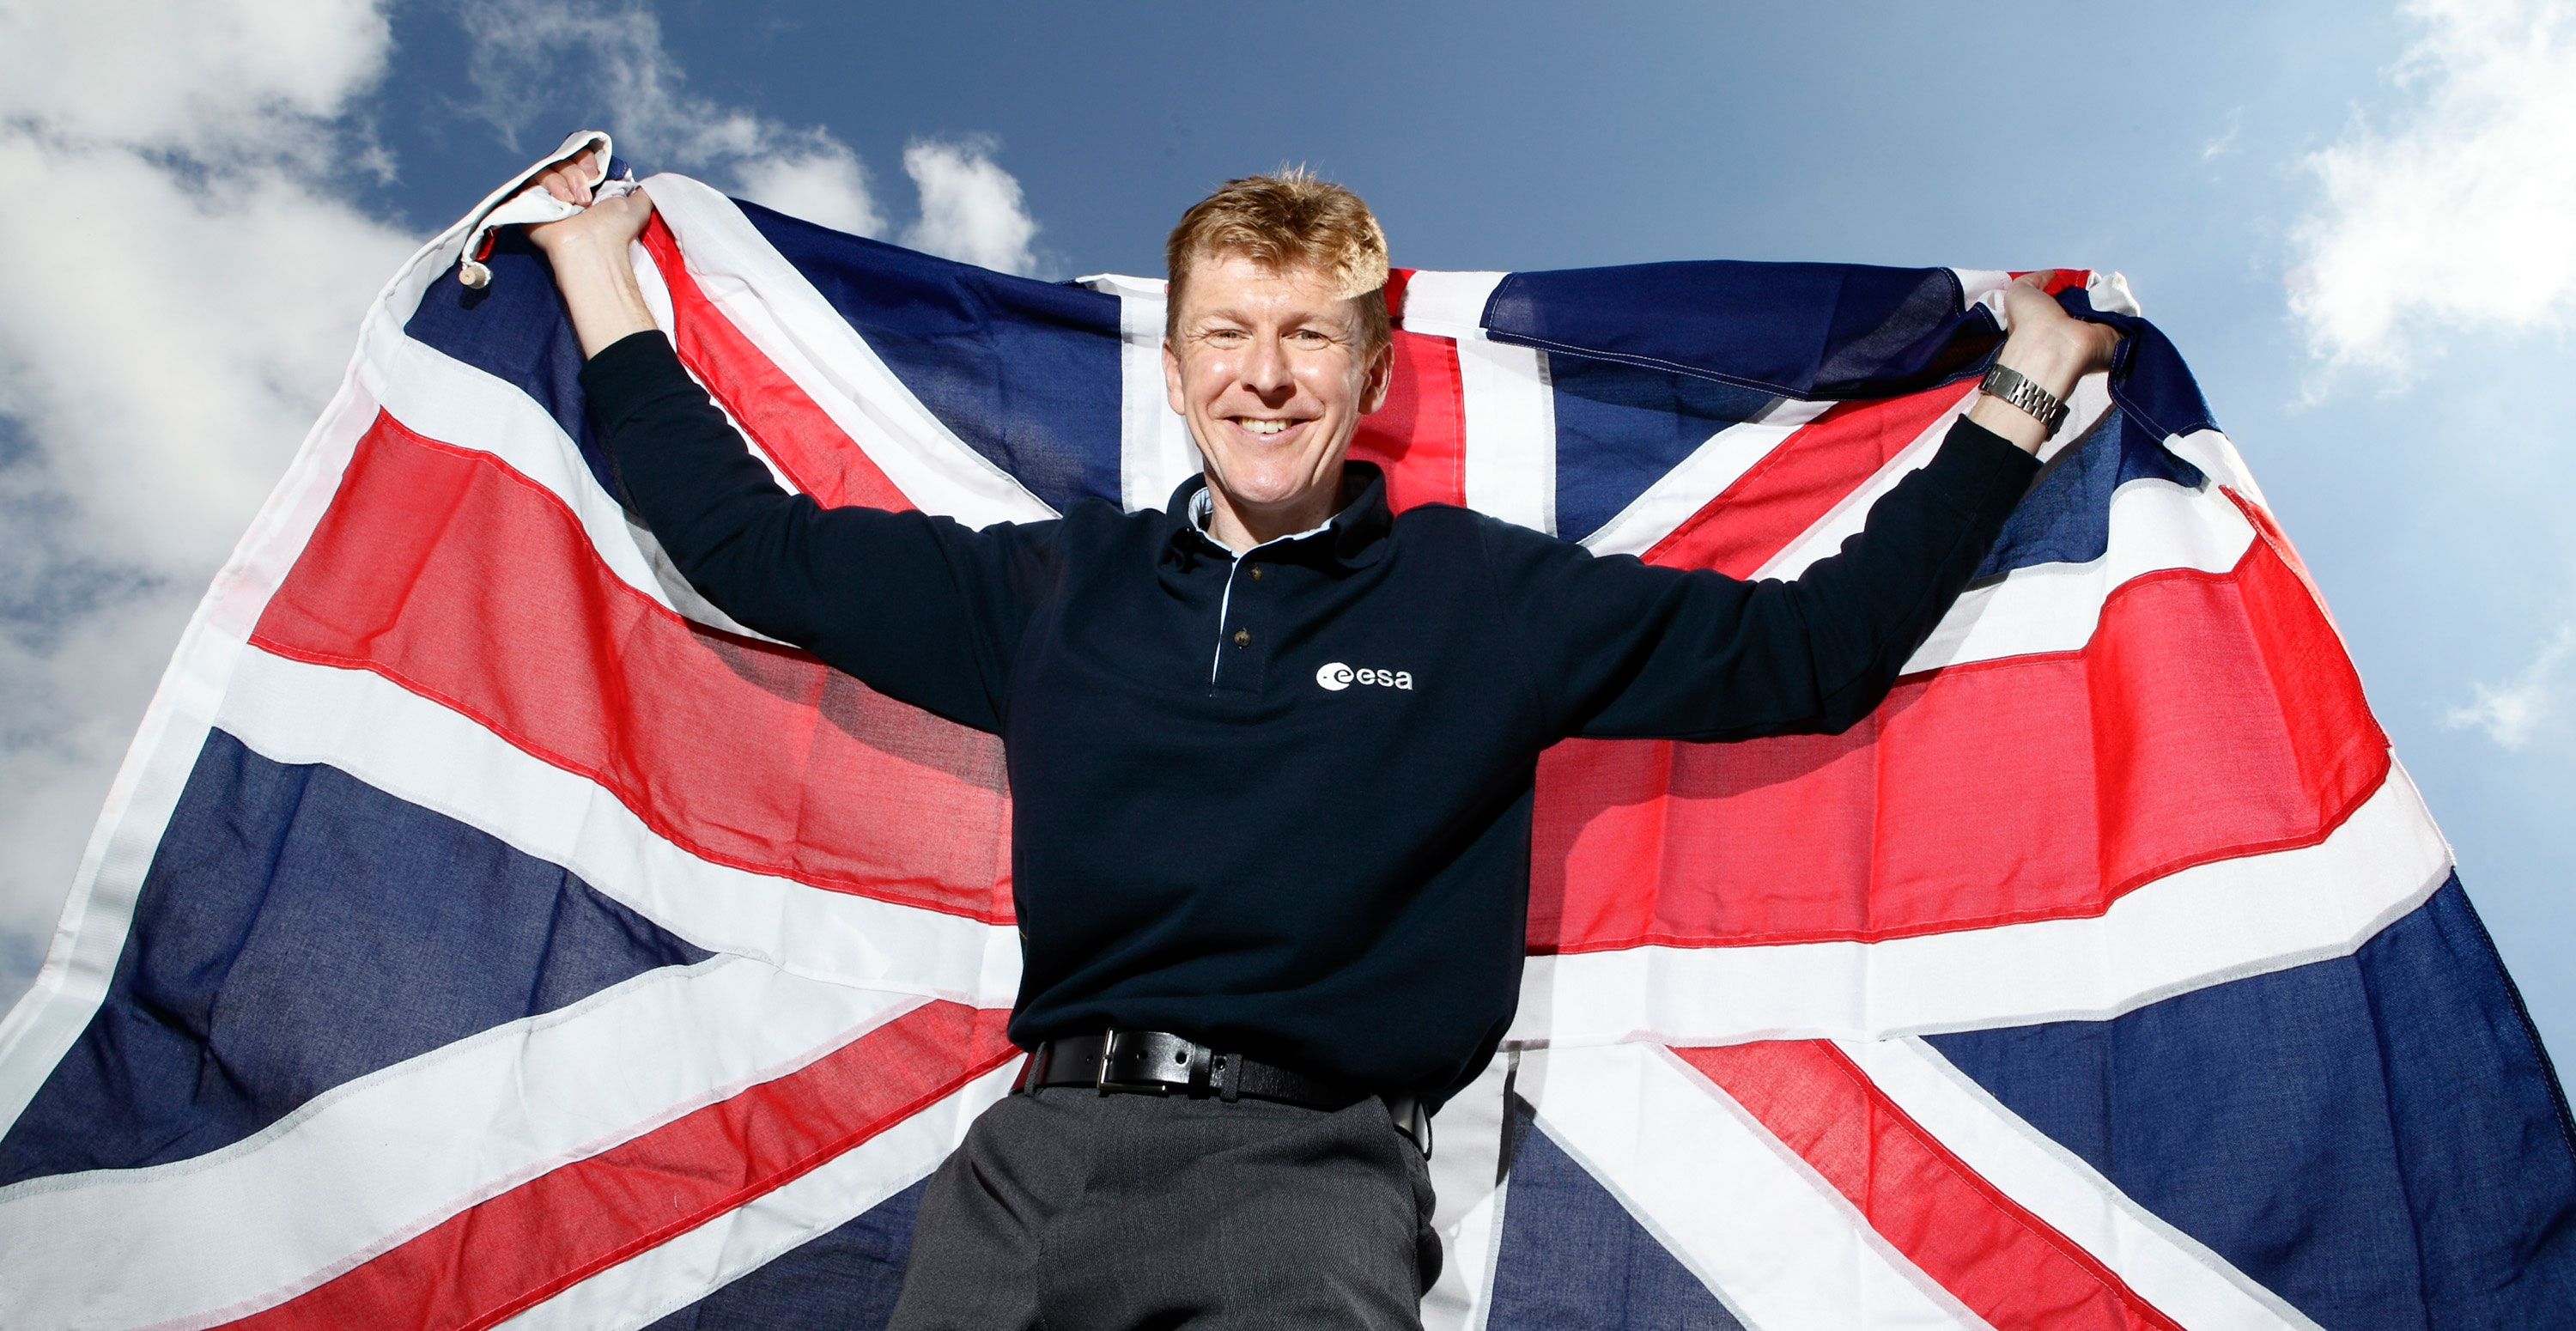 The United Kingdom’s Timothy Peake is currently training for his long-duration mission to the International Space Station, to be launched in November. He will be the first British ESA astronaut to visit the Space Station. Credit: UK Department for Business, Innovation and Skills